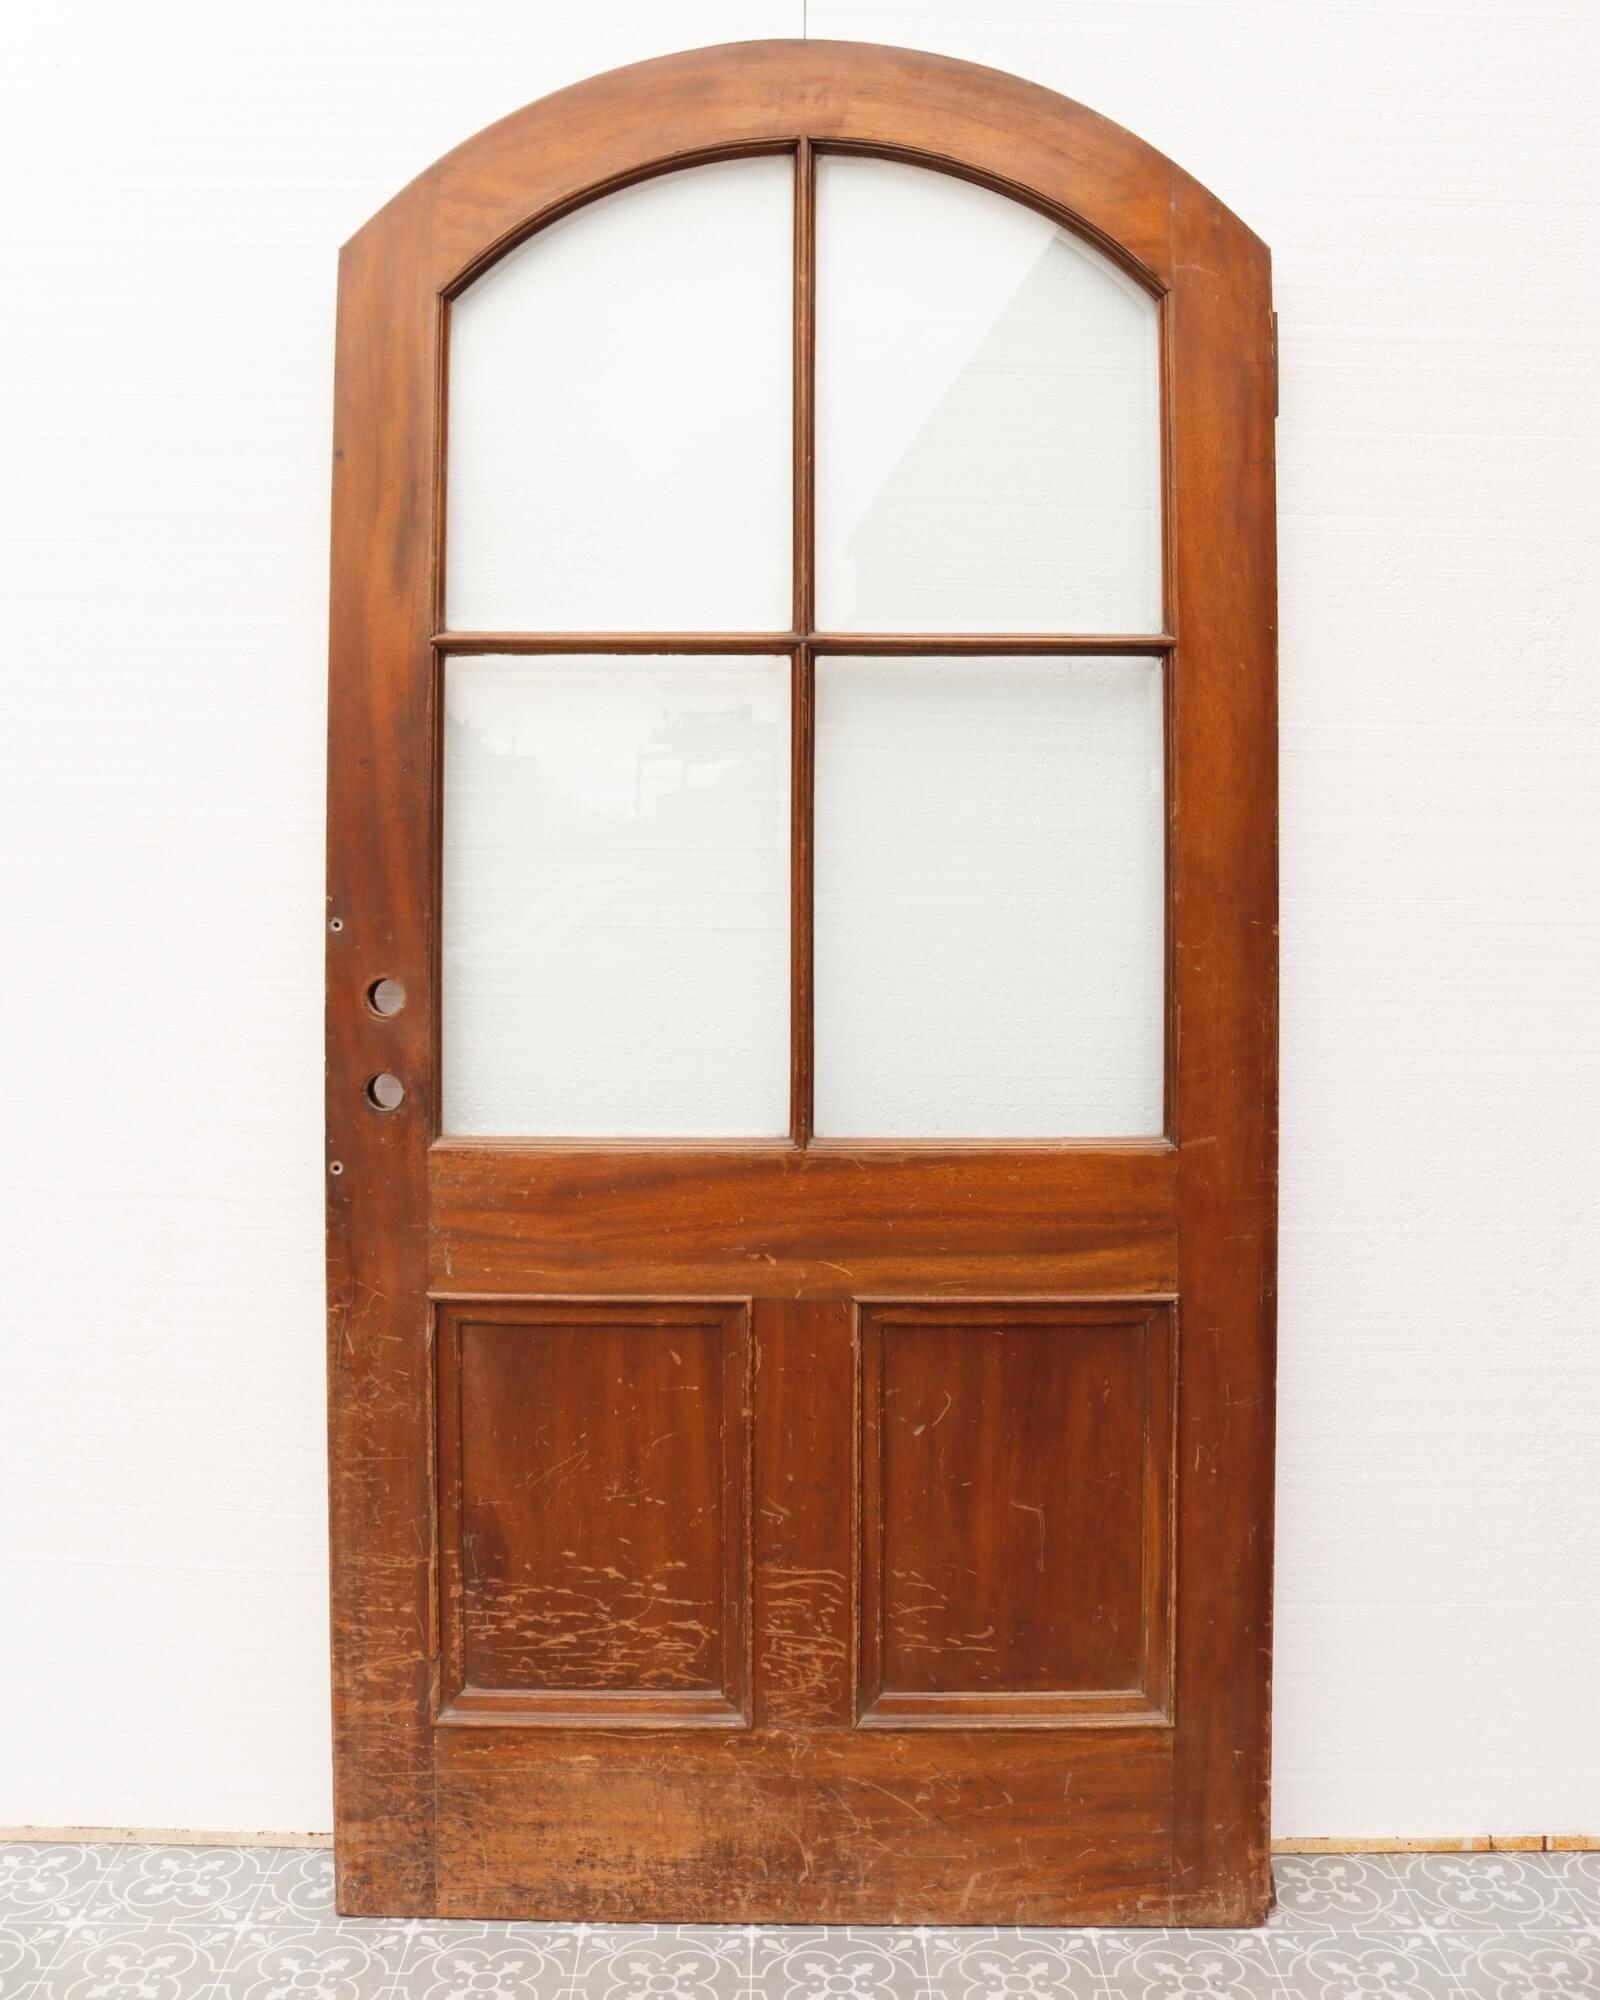 English Antique Glazed Arched Interior Mahogany Door For Sale